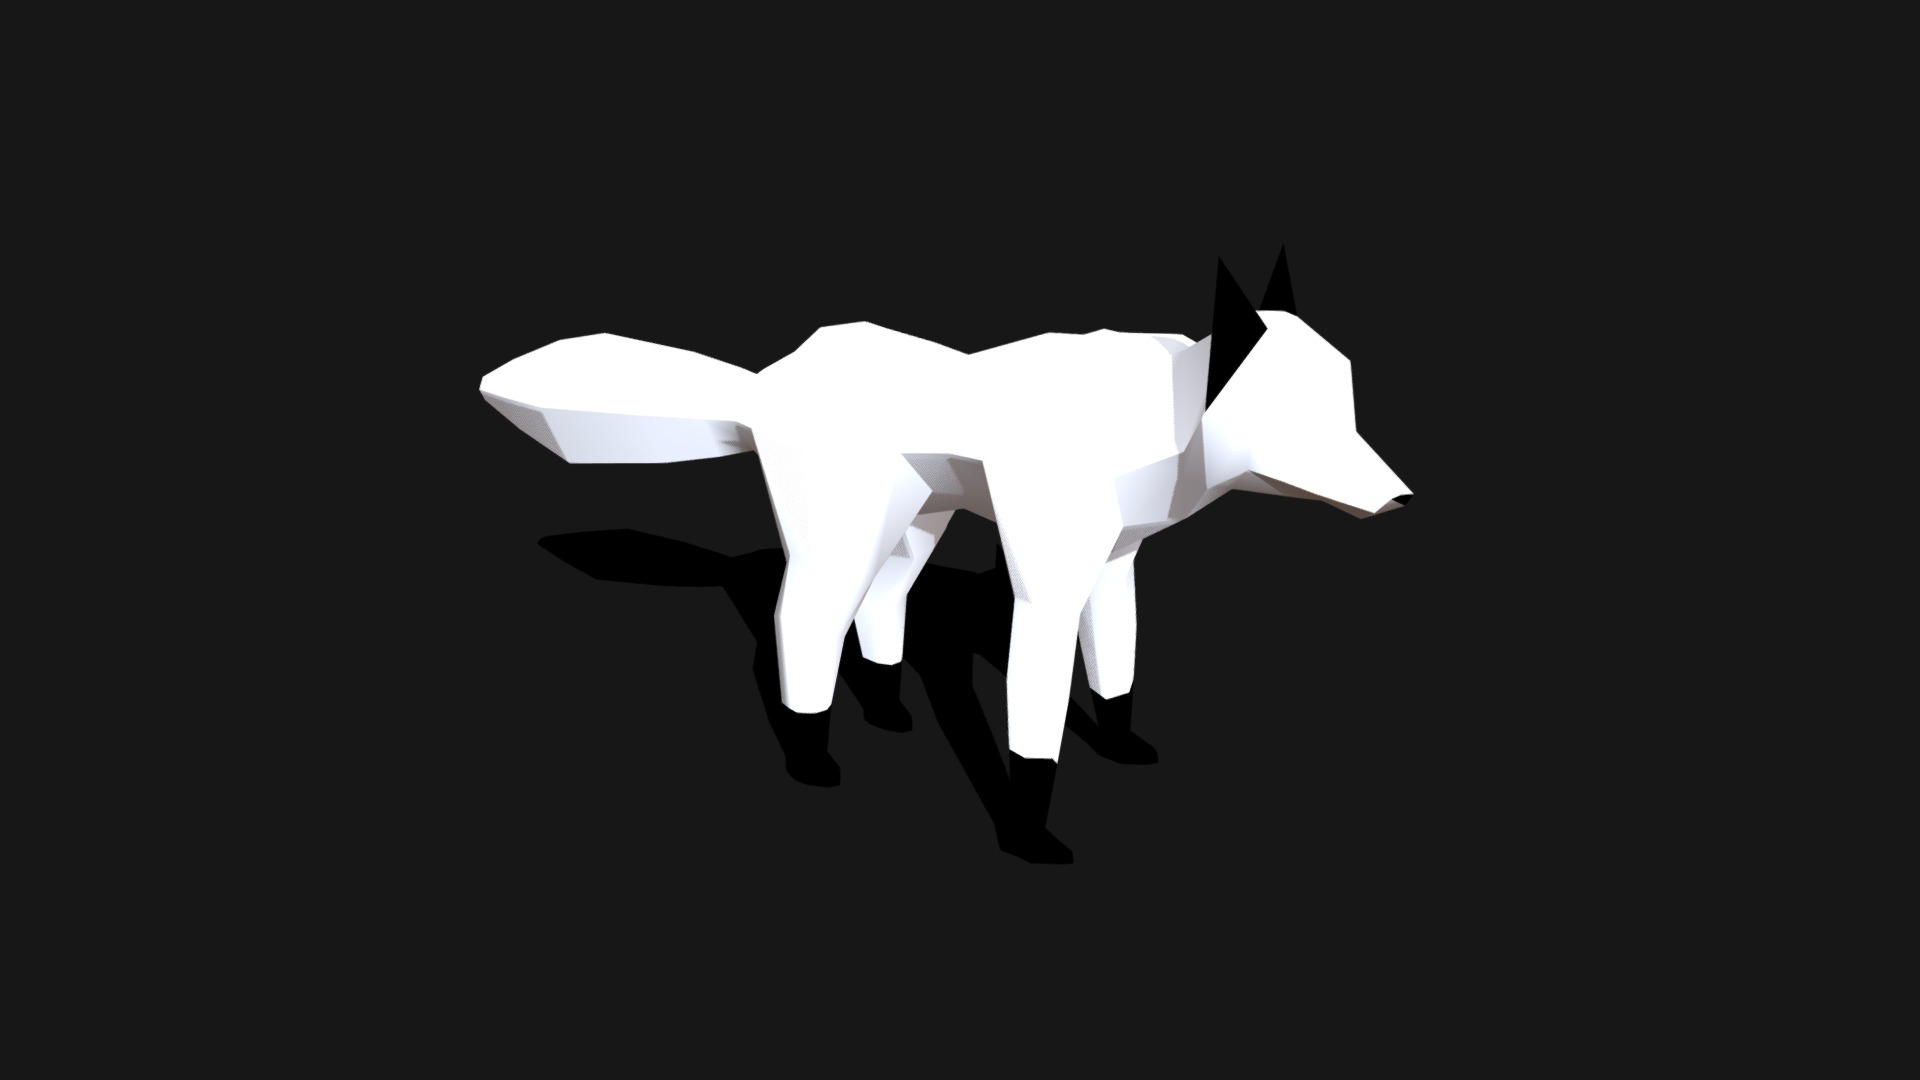 3D model Artic Fox – Lowpoly - This is a 3D model of the Artic Fox - Lowpoly. The 3D model is about a black and white image of a horse with a white tail.